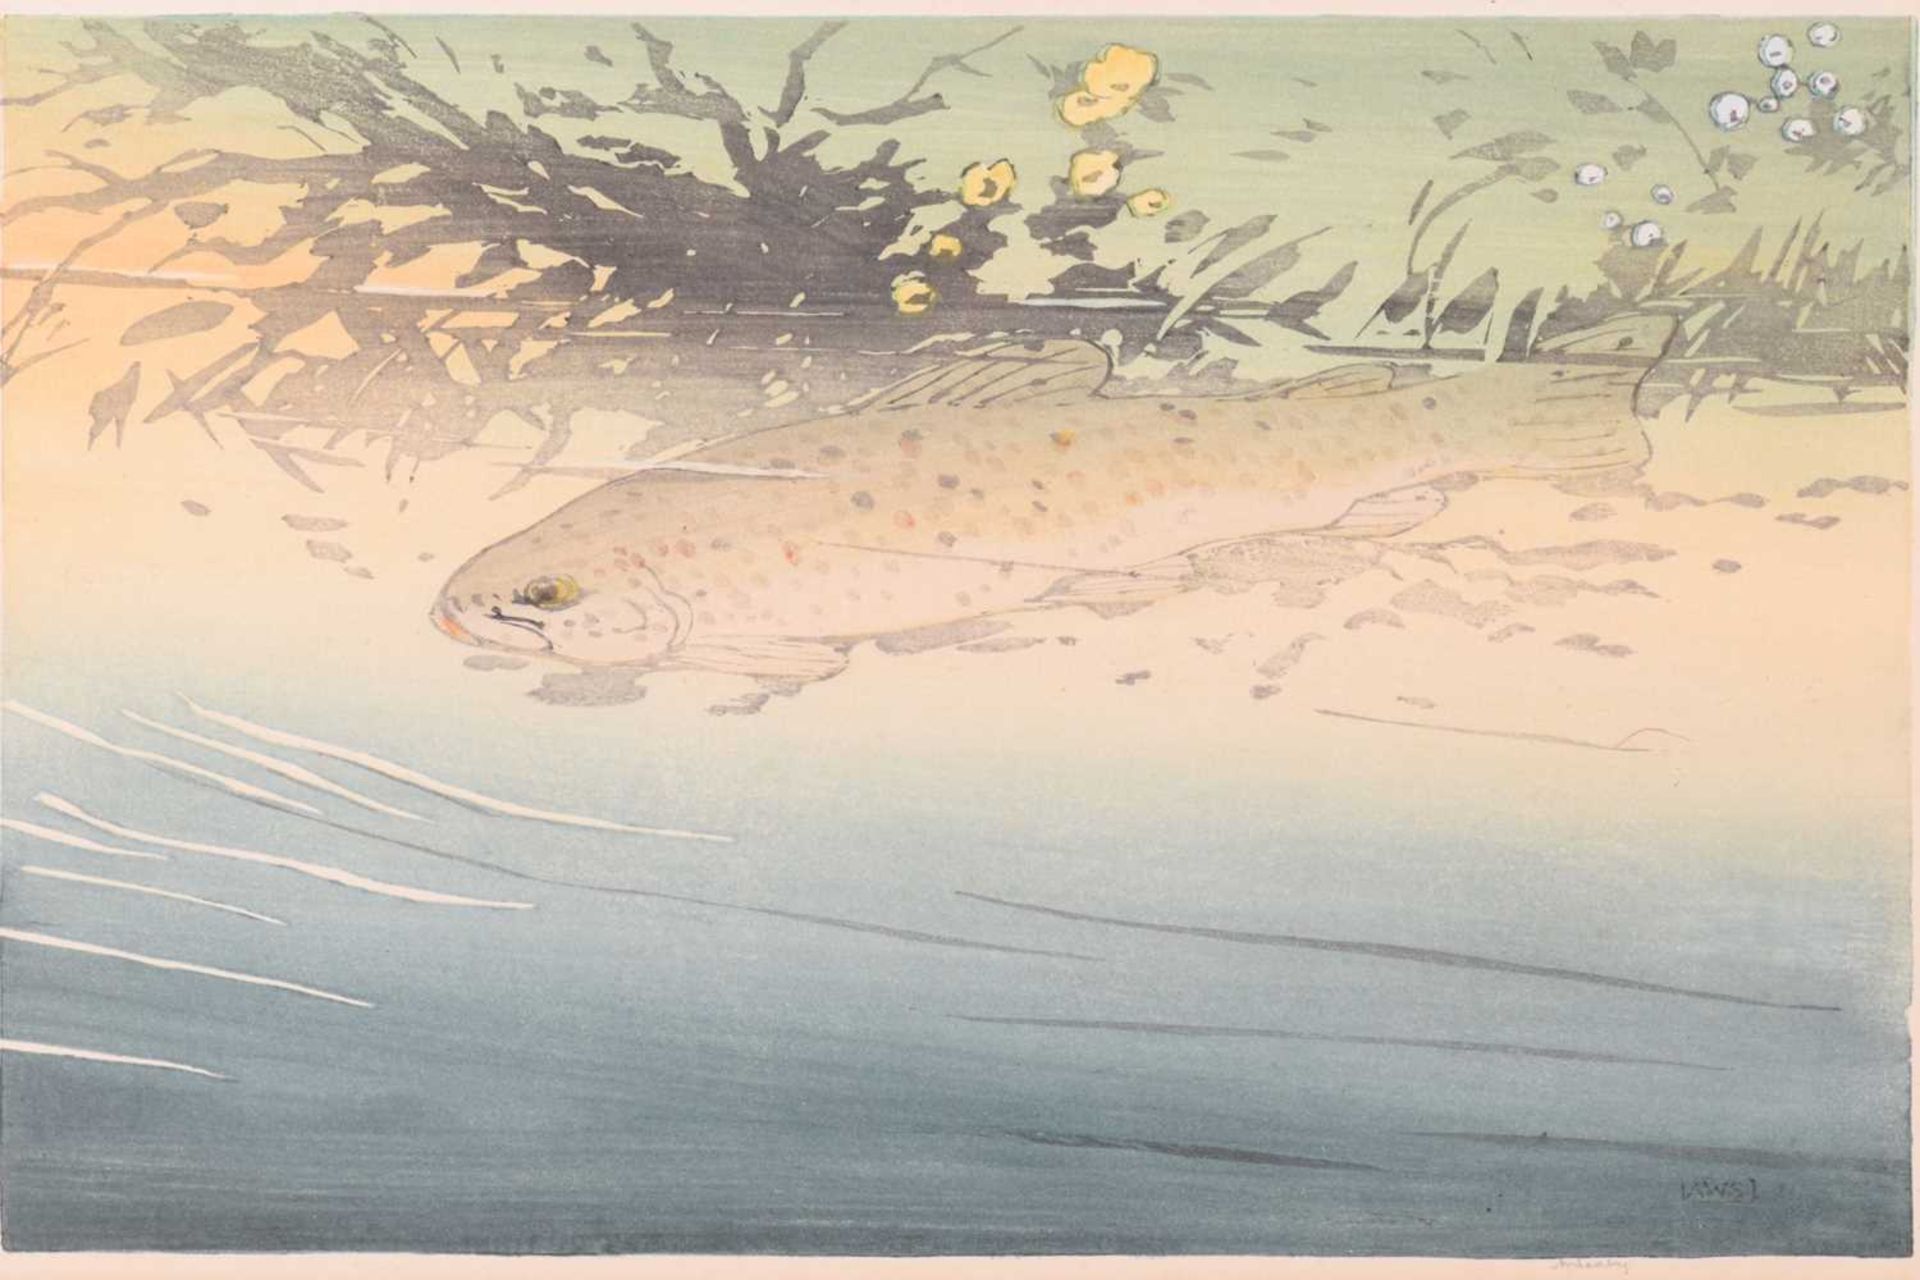 Allen William Seaby (1867 - 1953), Trout, signed in pencil, coloured woodblock print, image 21.5 x - Image 8 of 8